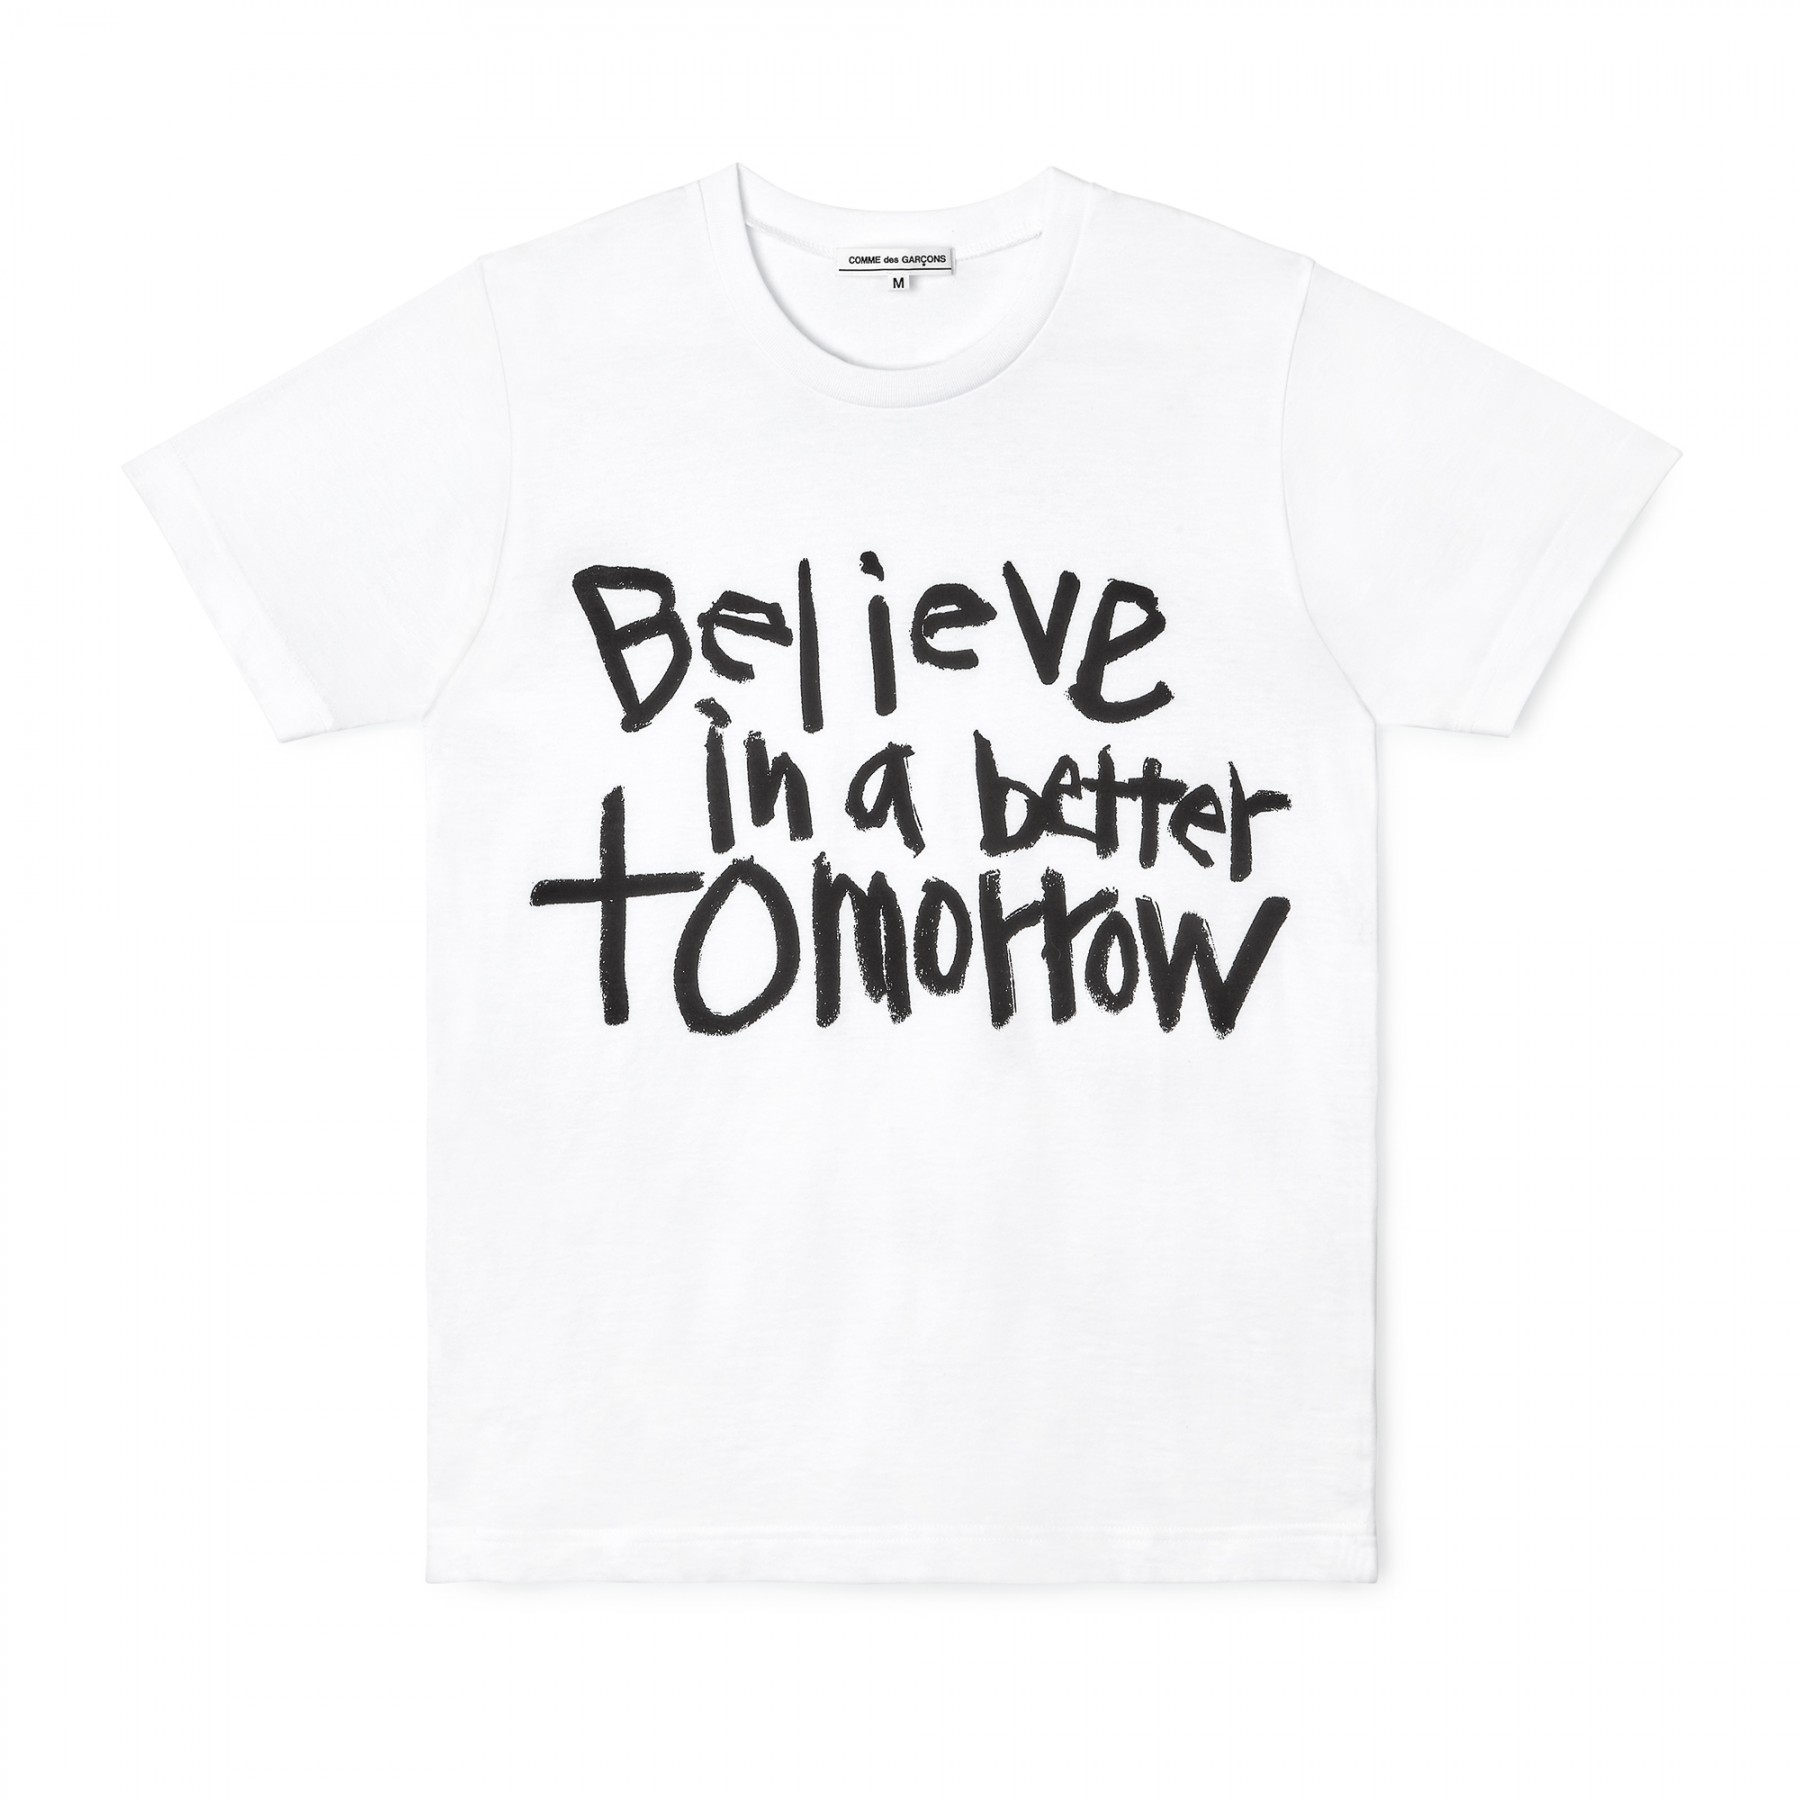 Comme Des Garcons releases Collection in Support of Black Lives Matter